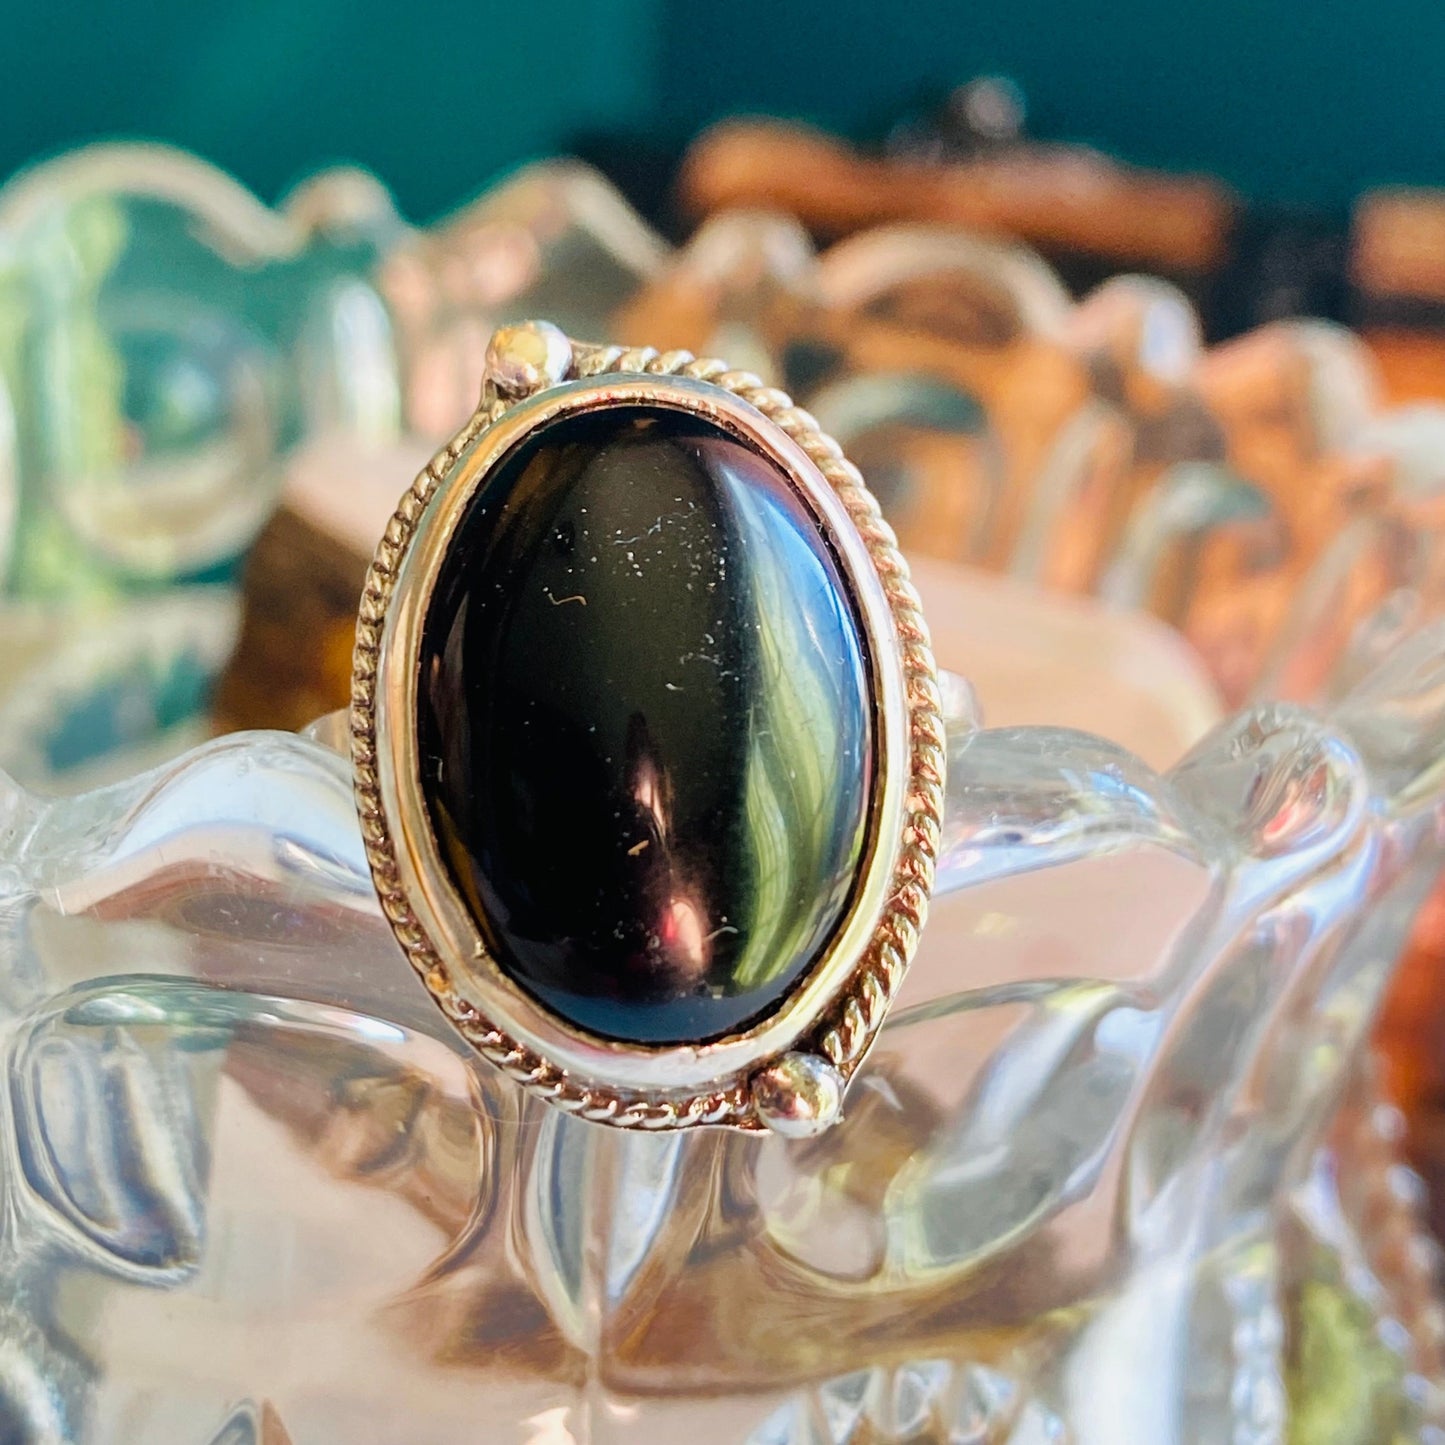 sterling silver onyx statement ring, onyx cabachon with half twisted wire with granulation (tiny dots) offset, statement ring, simple band